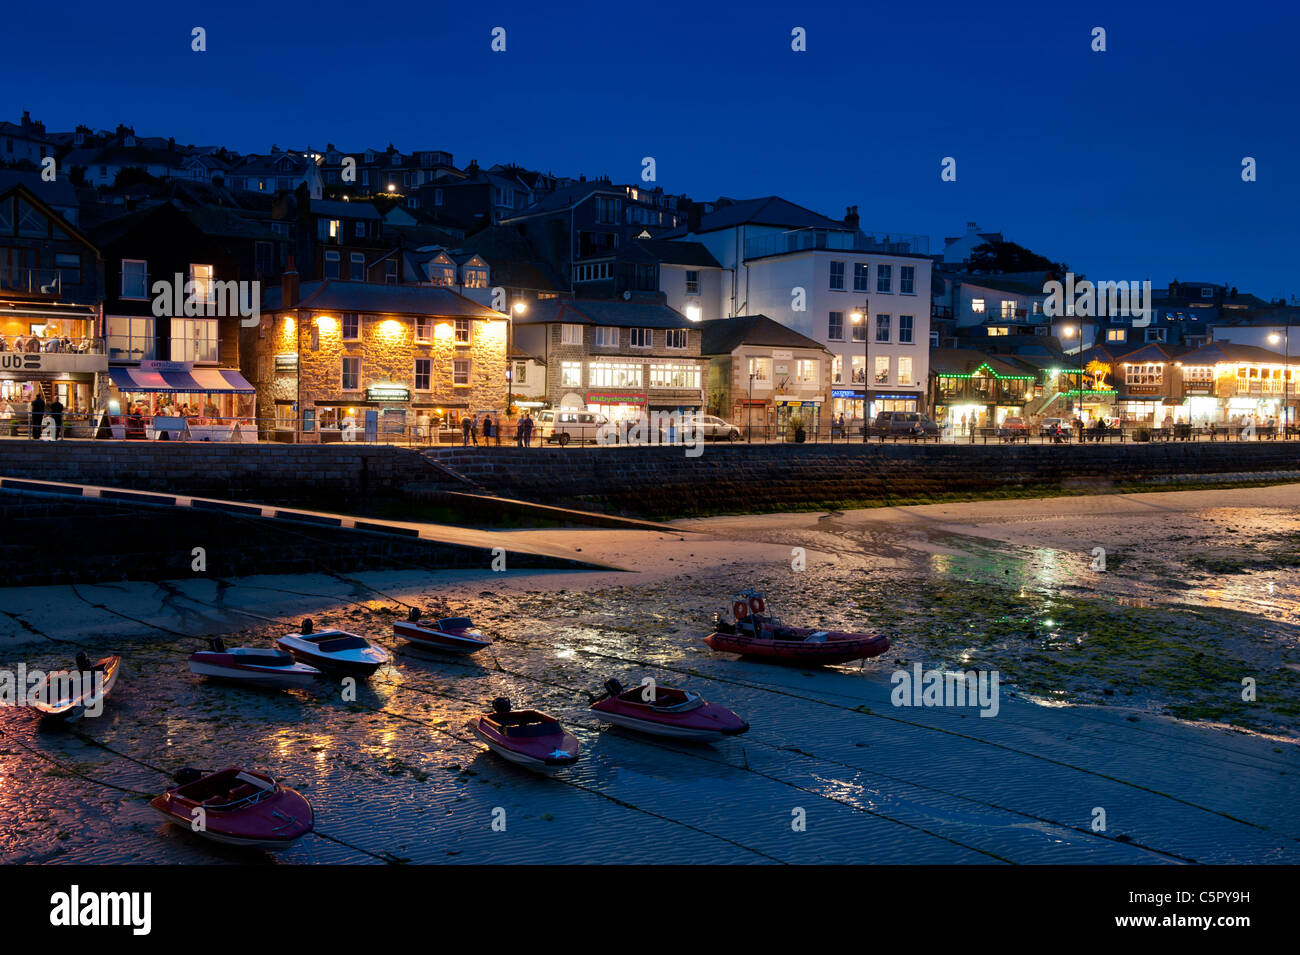 St Ives harbour at night featuring well lit bars and restaurants along with a low tide. Stock Photo